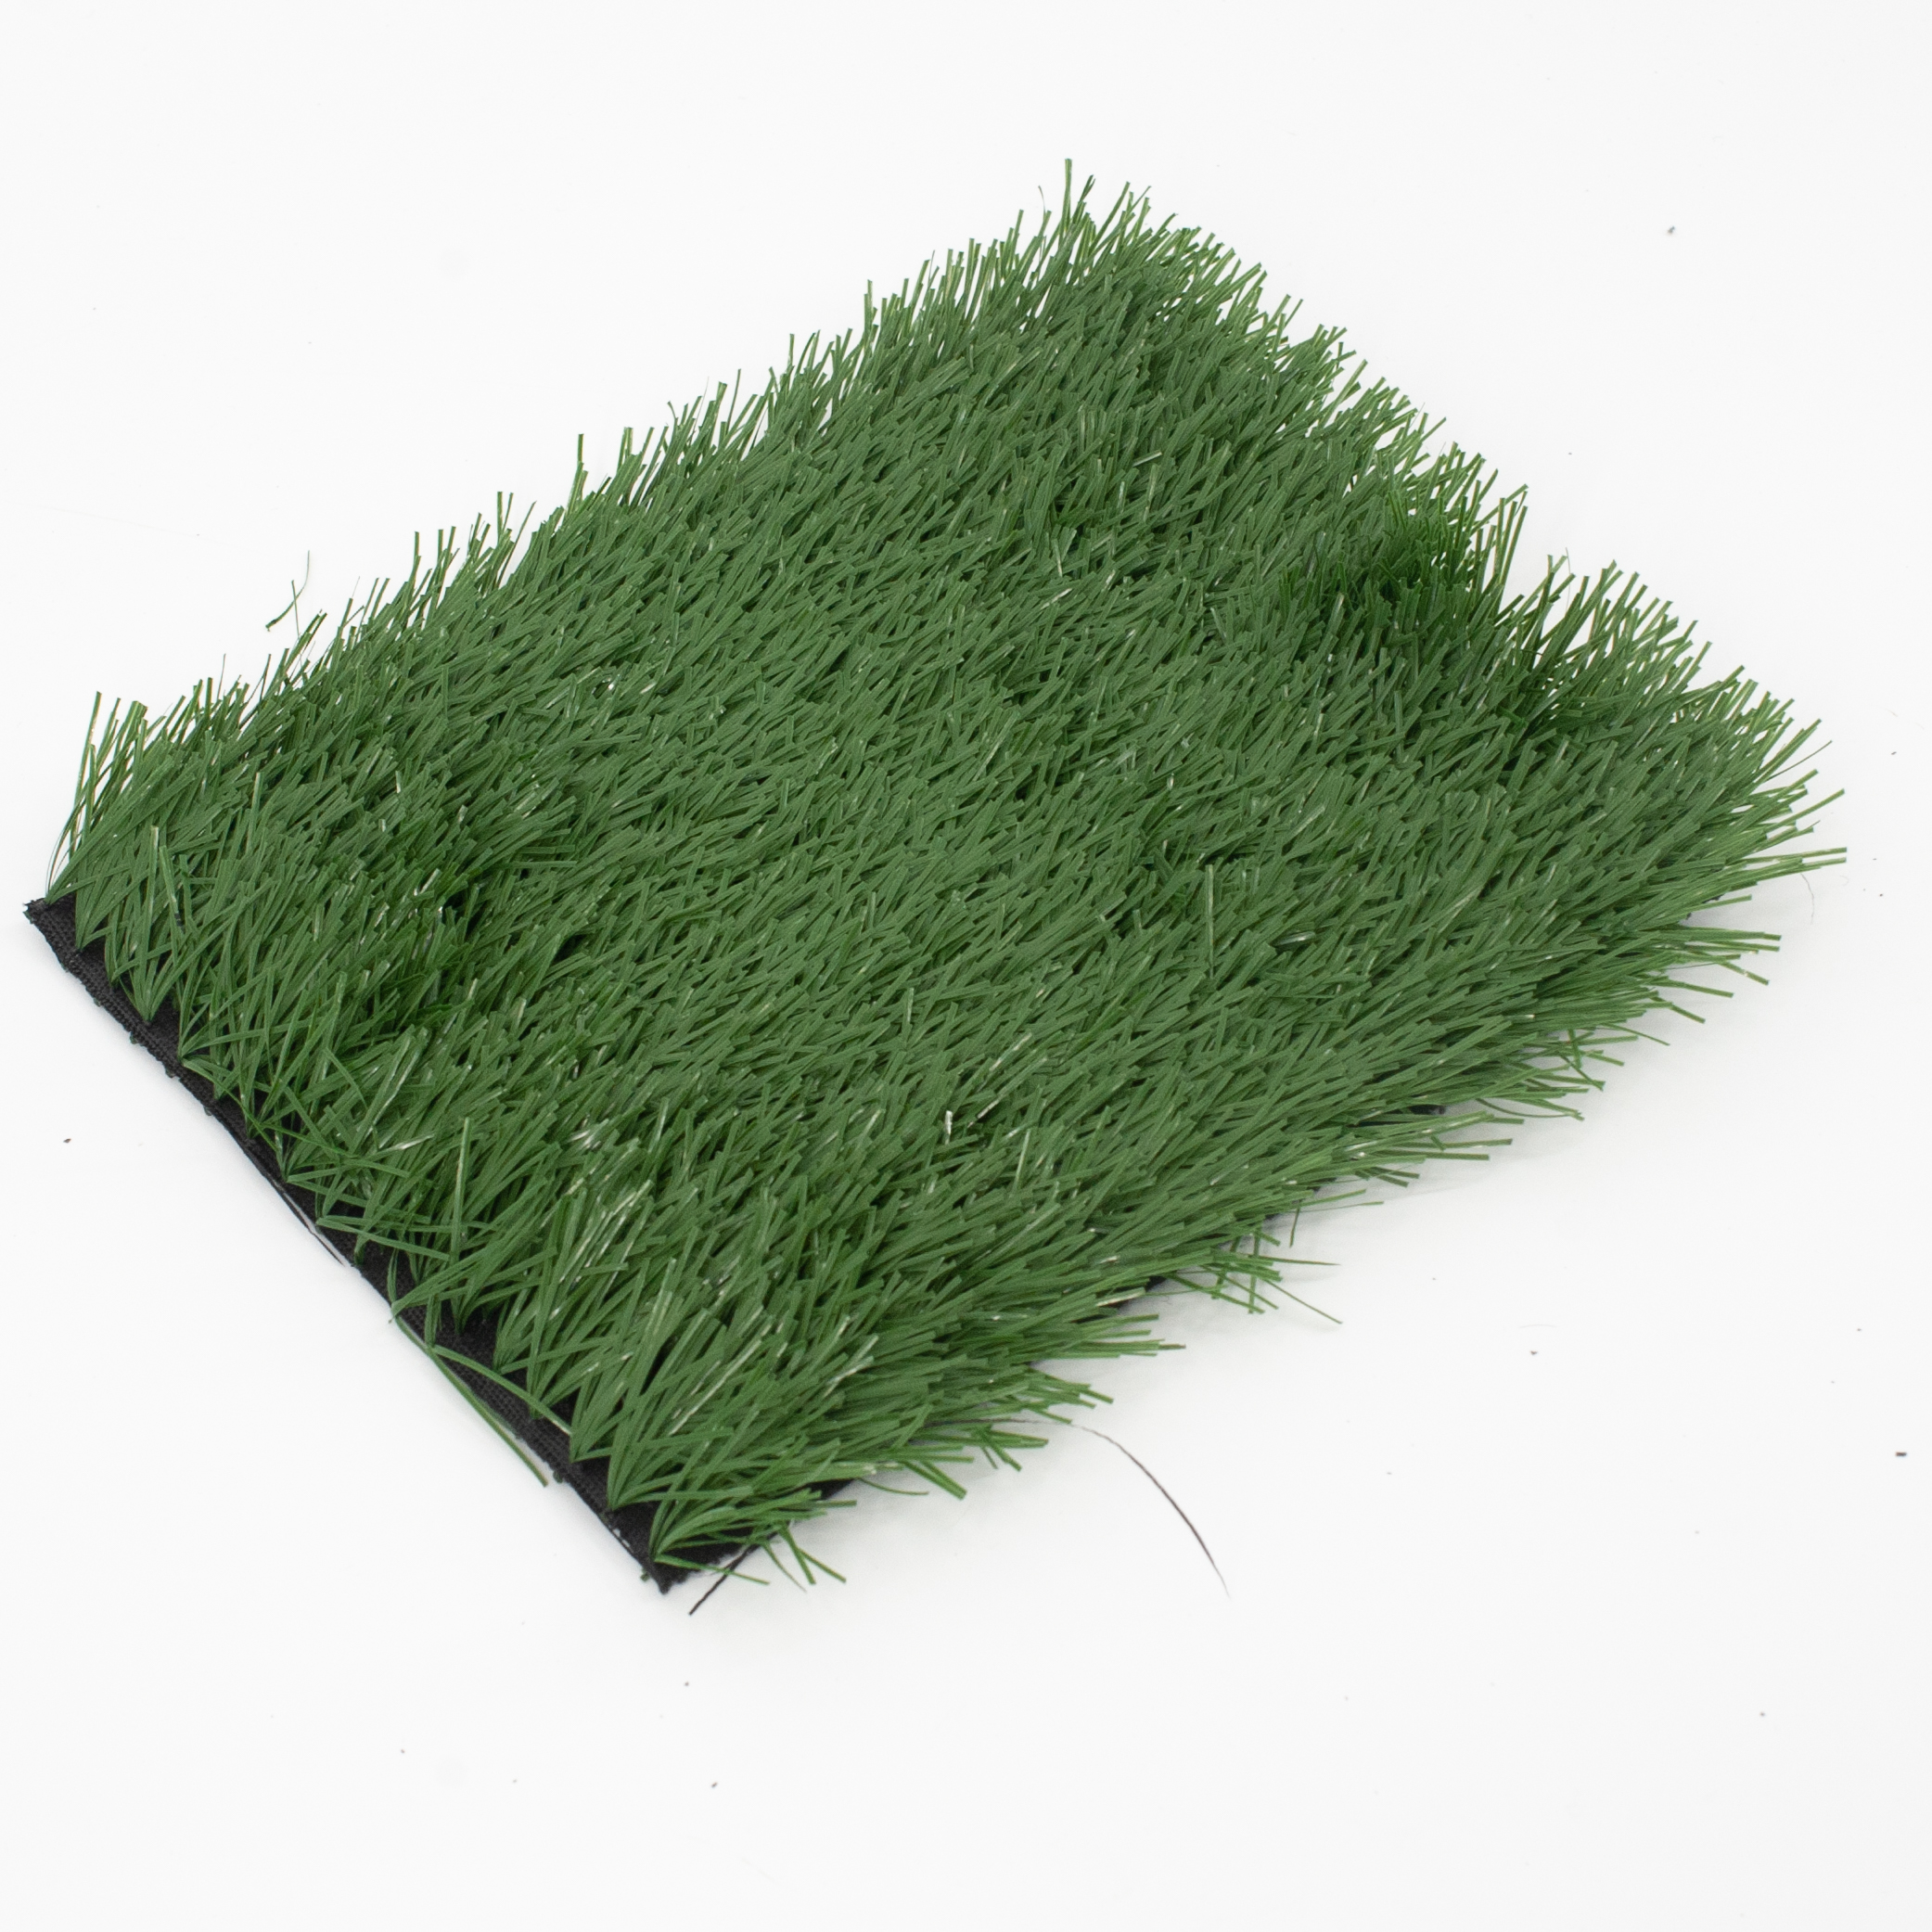 Football Synthetic Turf, Soccer Artificial Grass, Football Grass, Soccer Turf, Synthetic Turf, Lawn, Artificial Grass